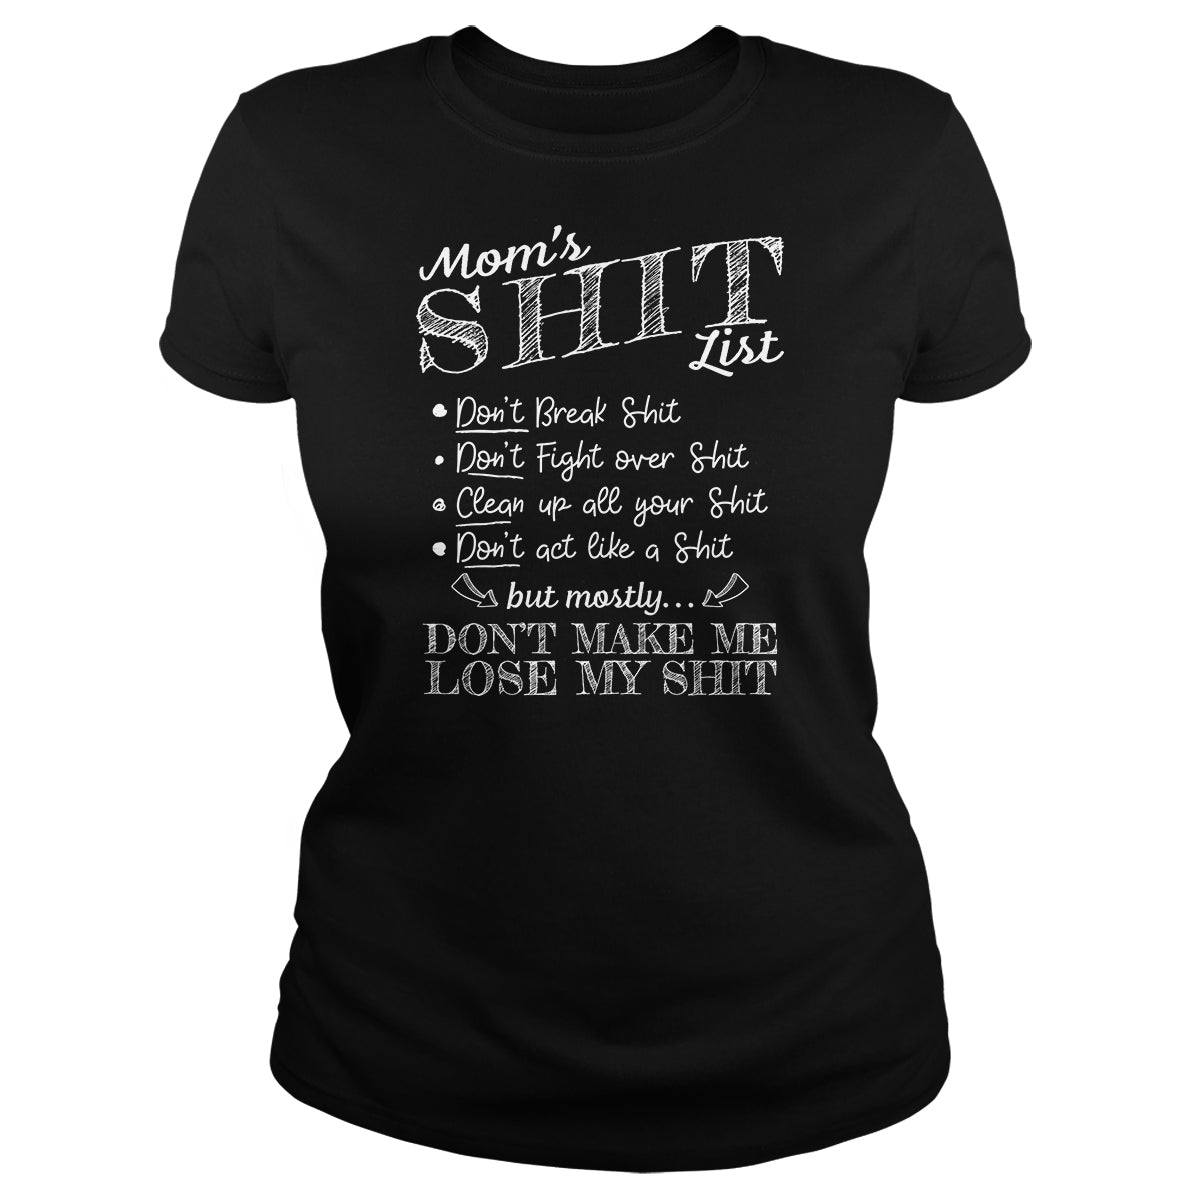 Mom's Shit List - BustedTees.com